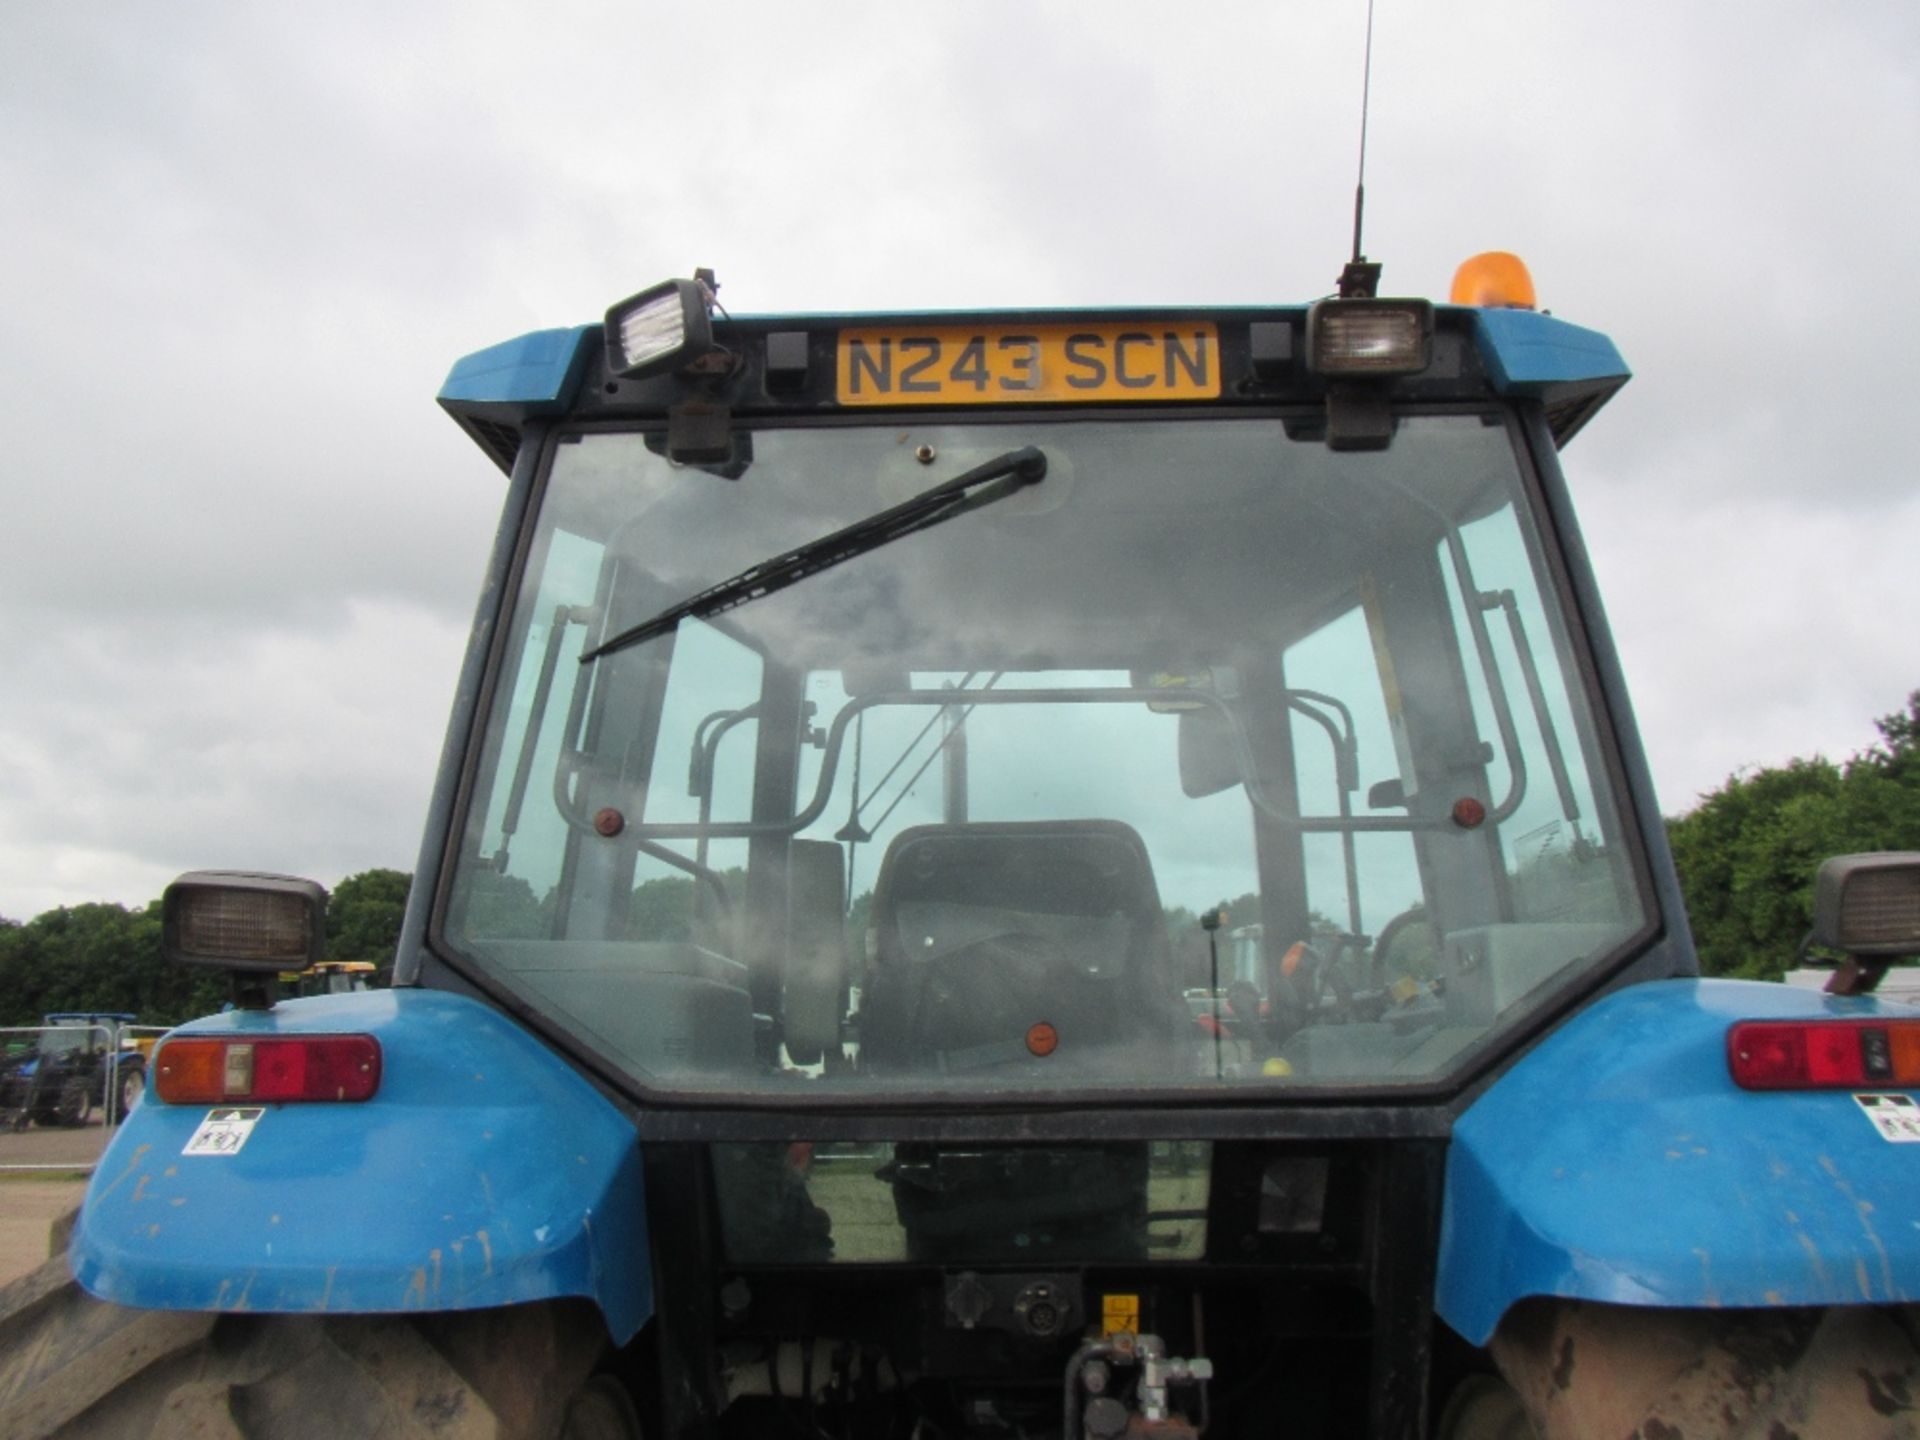 New Holland 8340 SLE 4wd Tractor. Reg. No. N243 SCN Ser. No. 025324B - Image 8 of 20